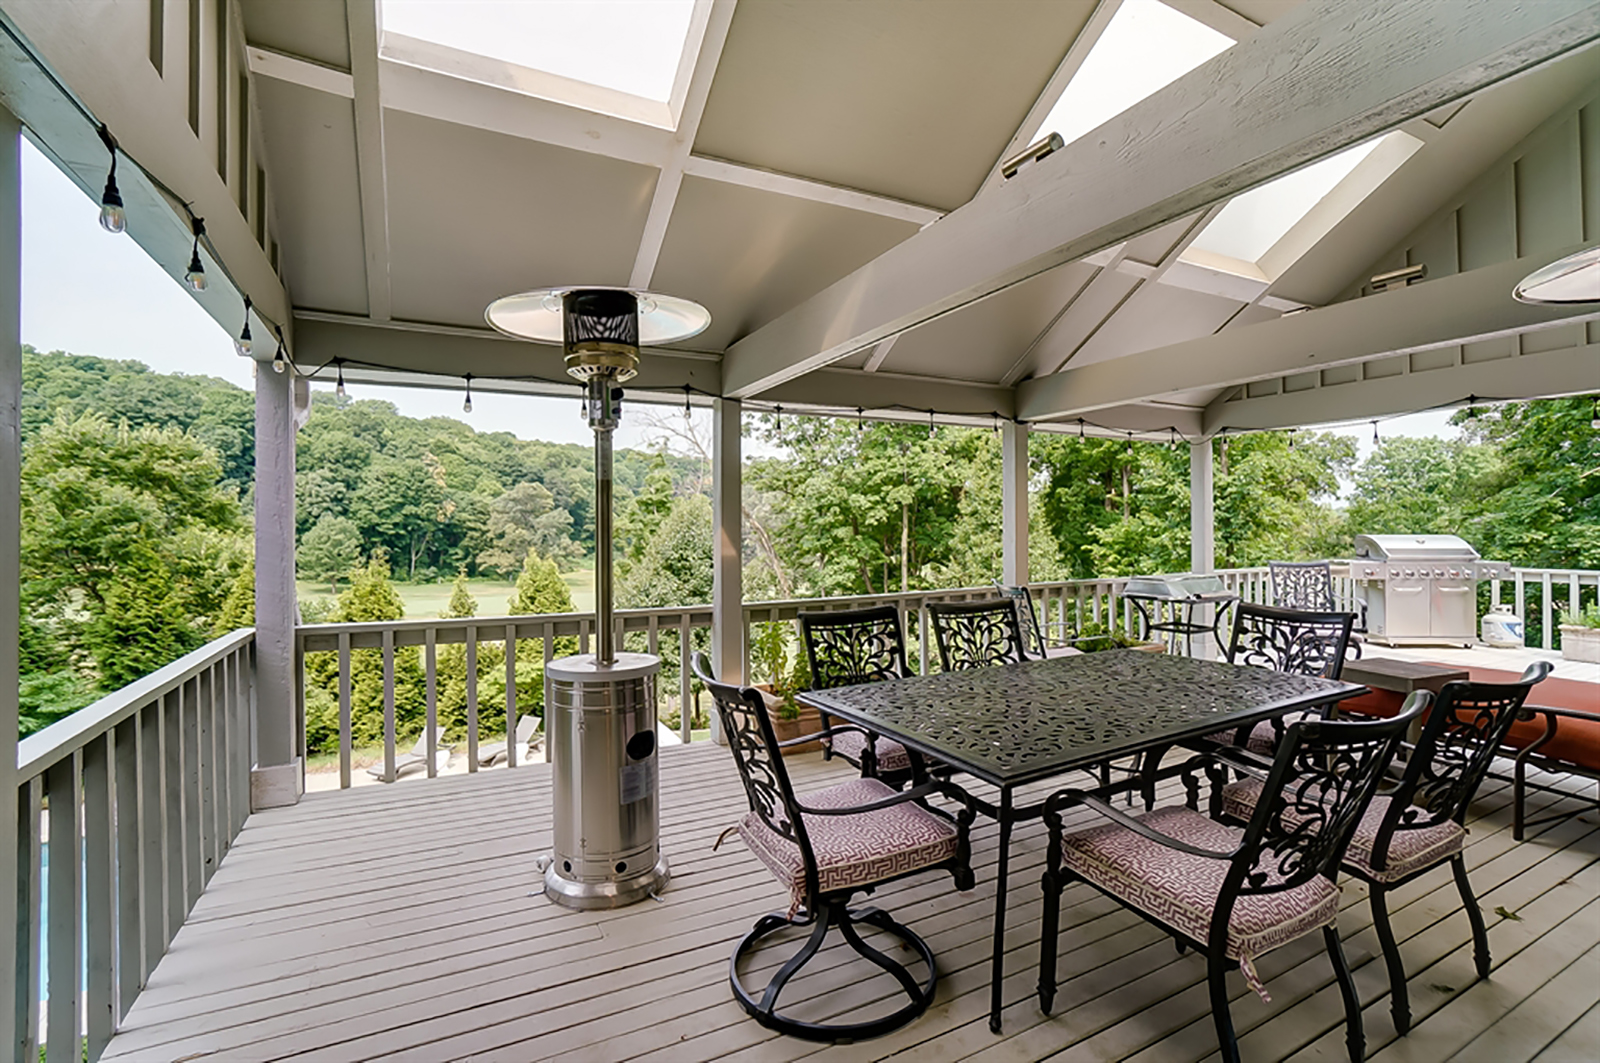 A wooden deck is partially covered with tinted skylights for natural light yet allows sun protection. CONTRIBUTED PHOTO